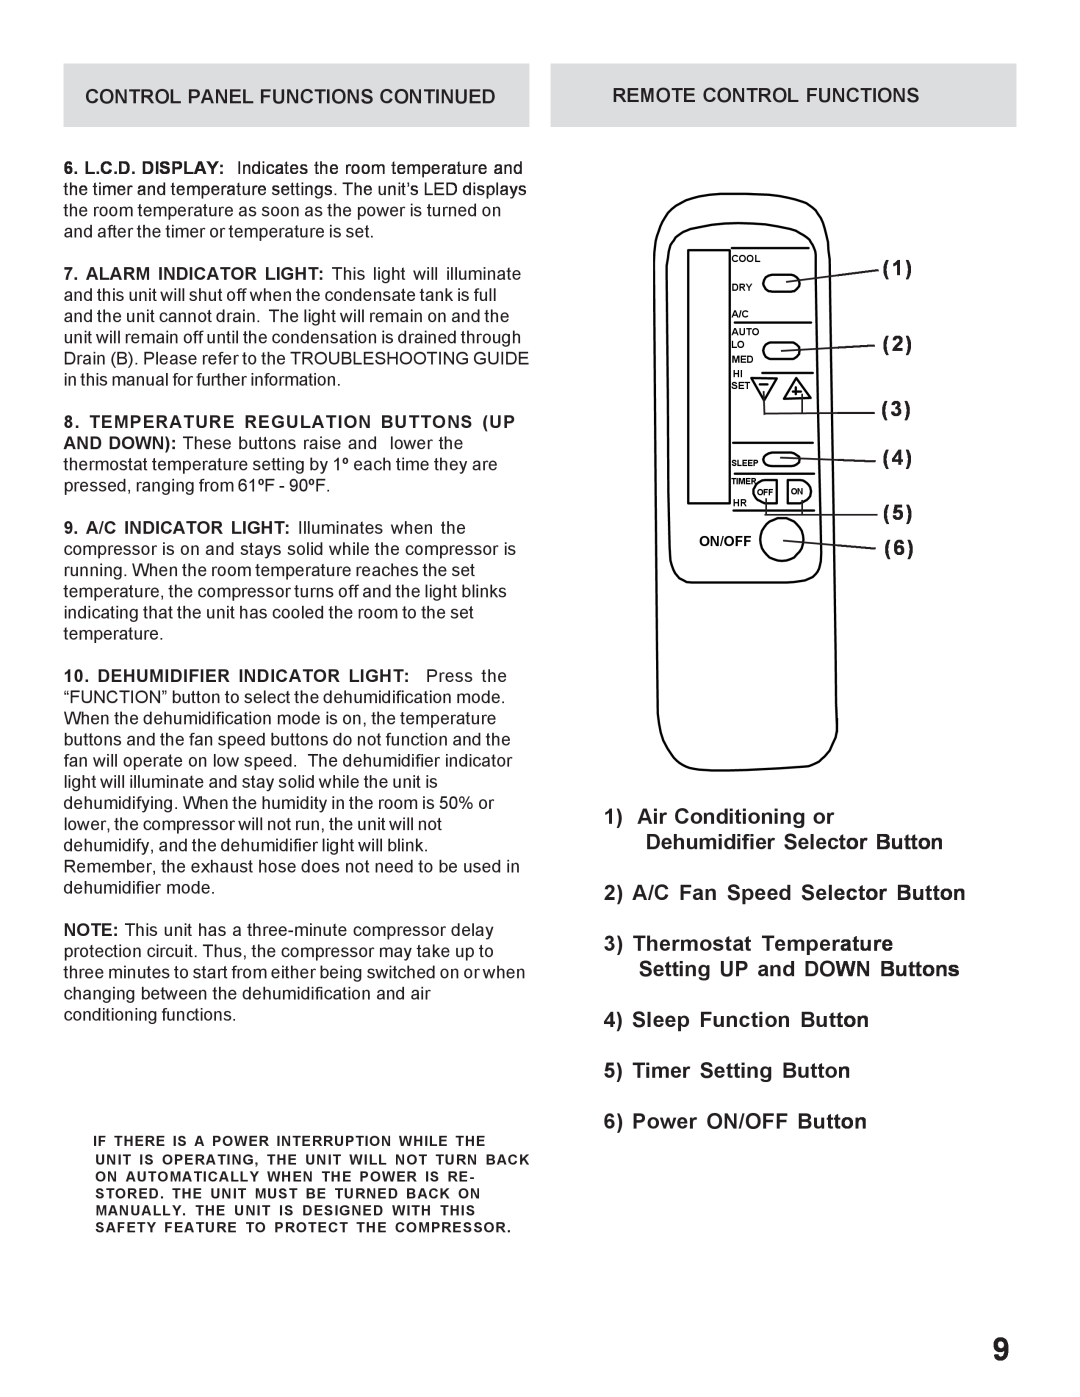 WindChaser Products PACR12 instruction manual 1Air Conditioning or Dehumidifier Selector Button 